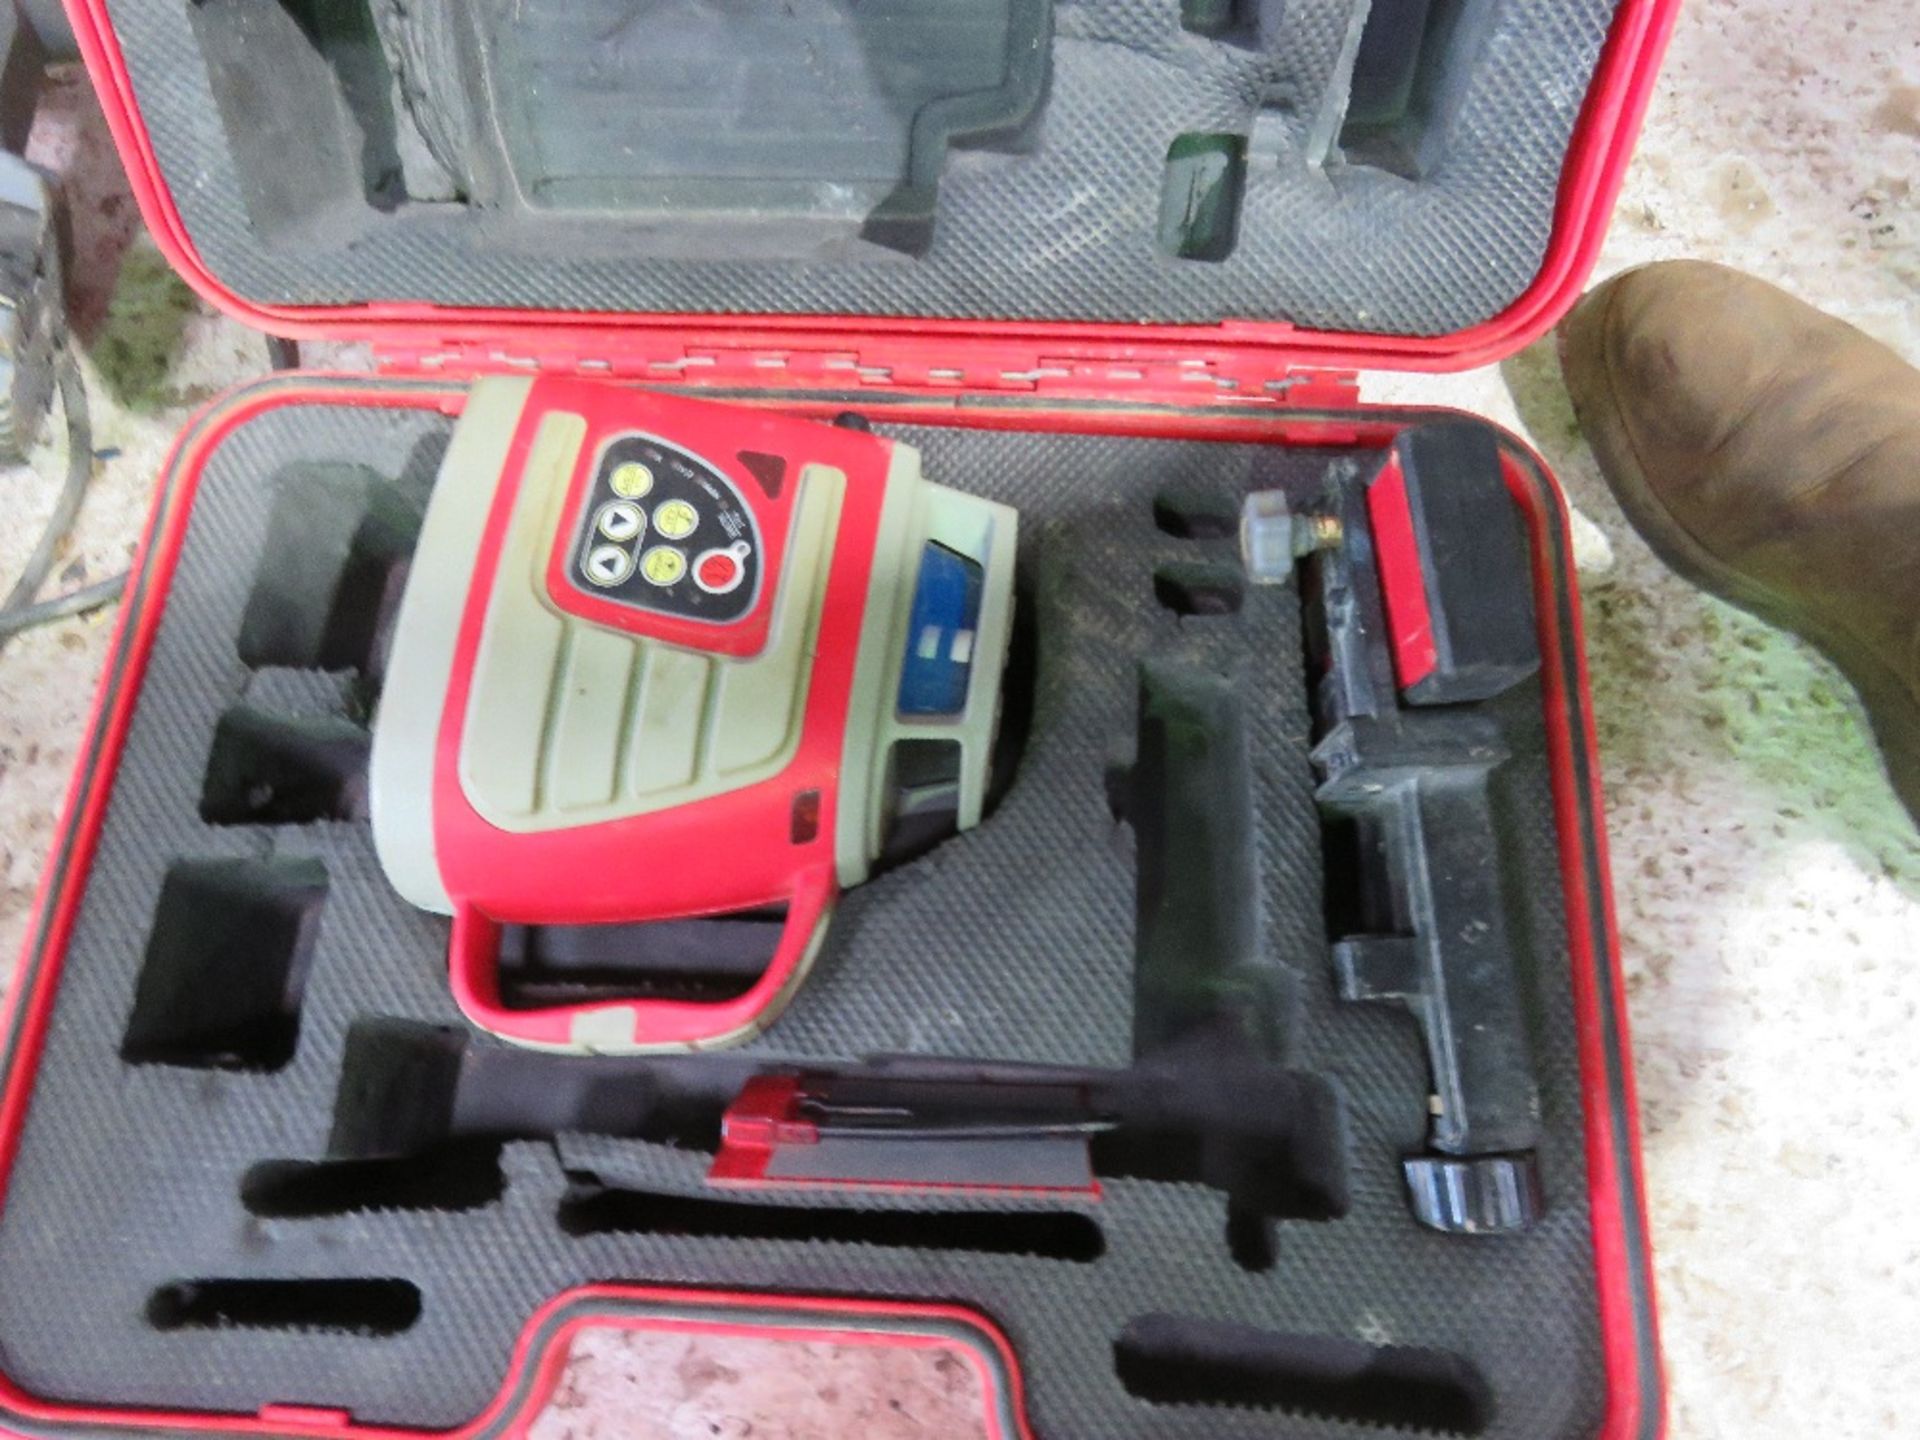 DATUM ROTARY LASER LEVEL IN A CASE.